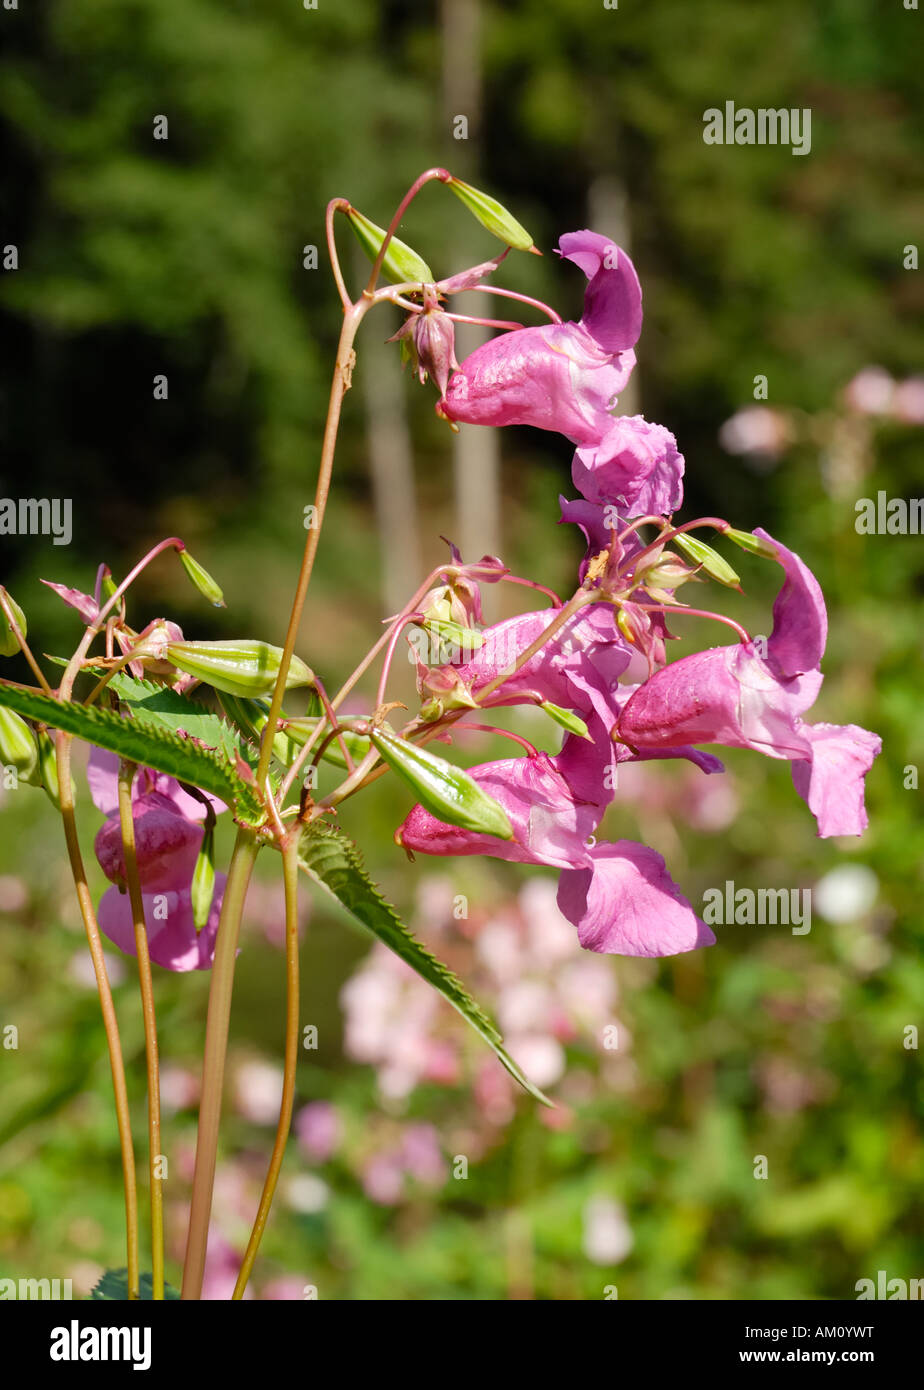 Impatiens glanulifera, Balsaminaceae imported pest displacing endemic species in many places Stock Photo